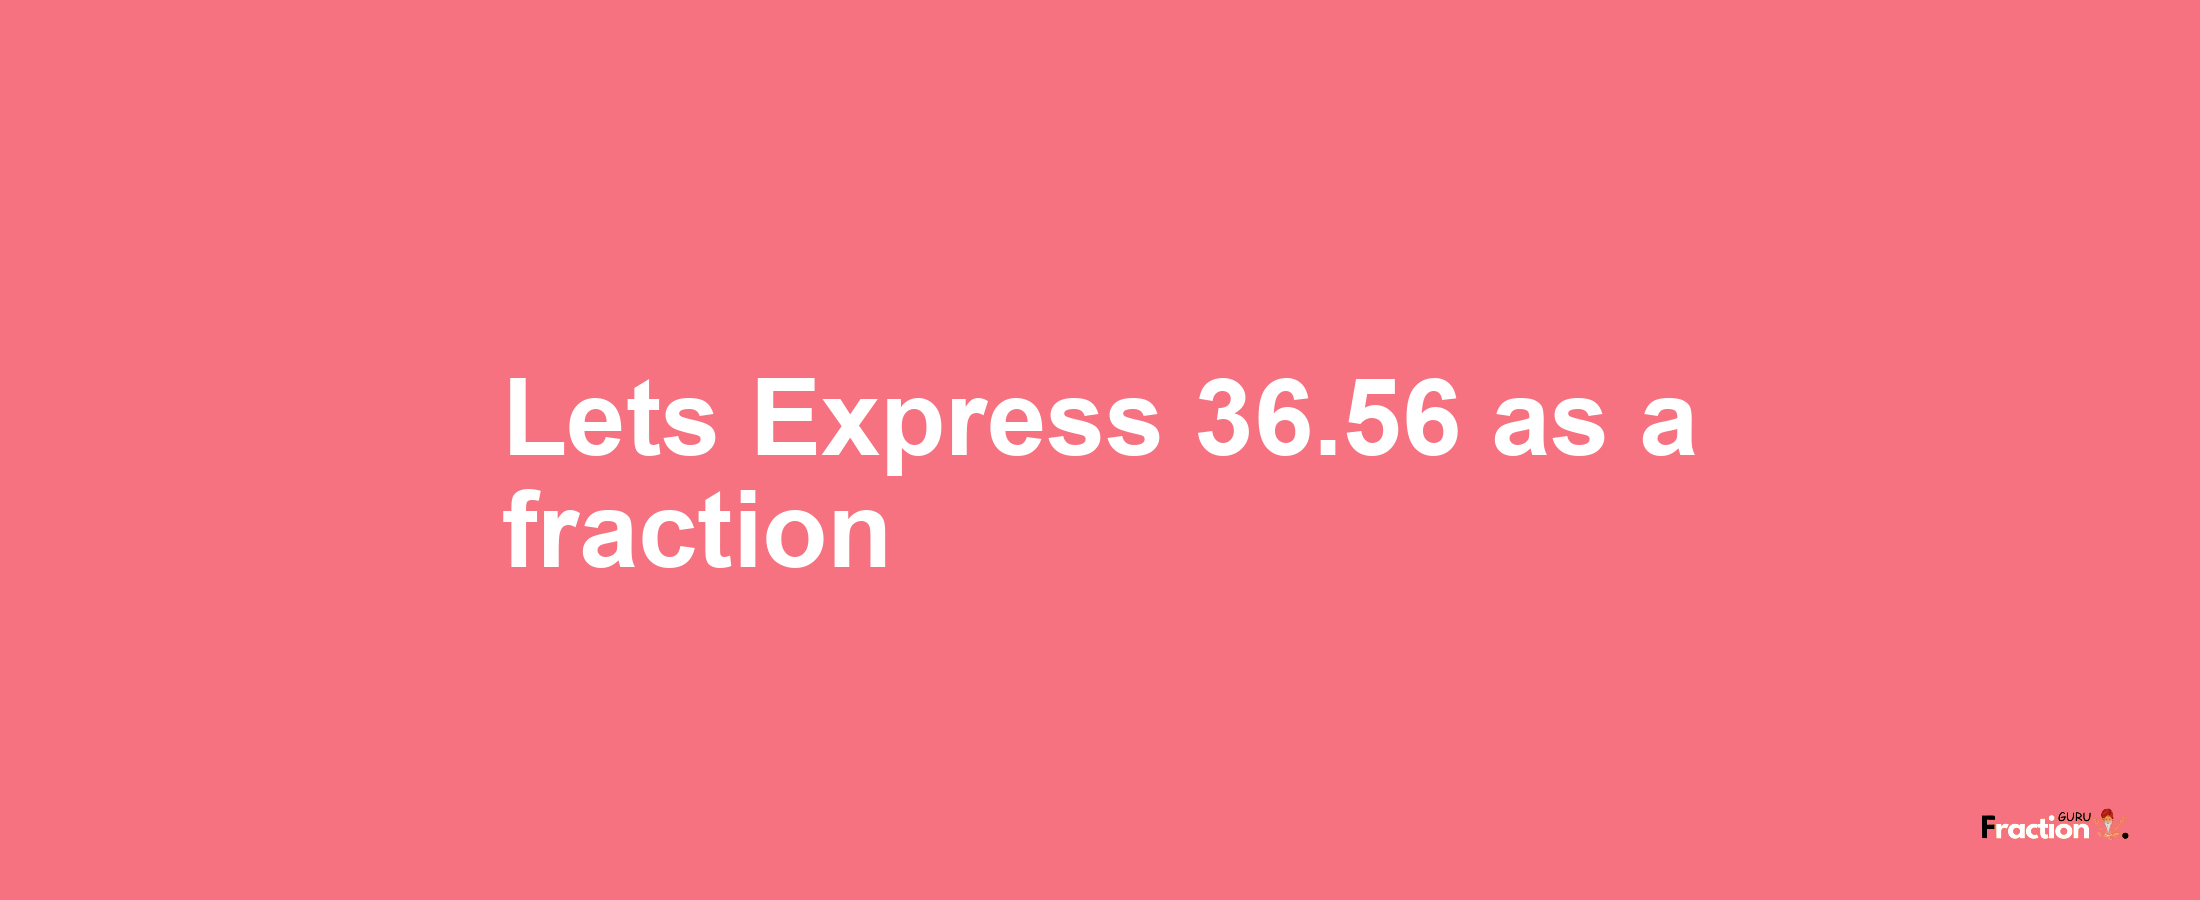 Lets Express 36.56 as afraction